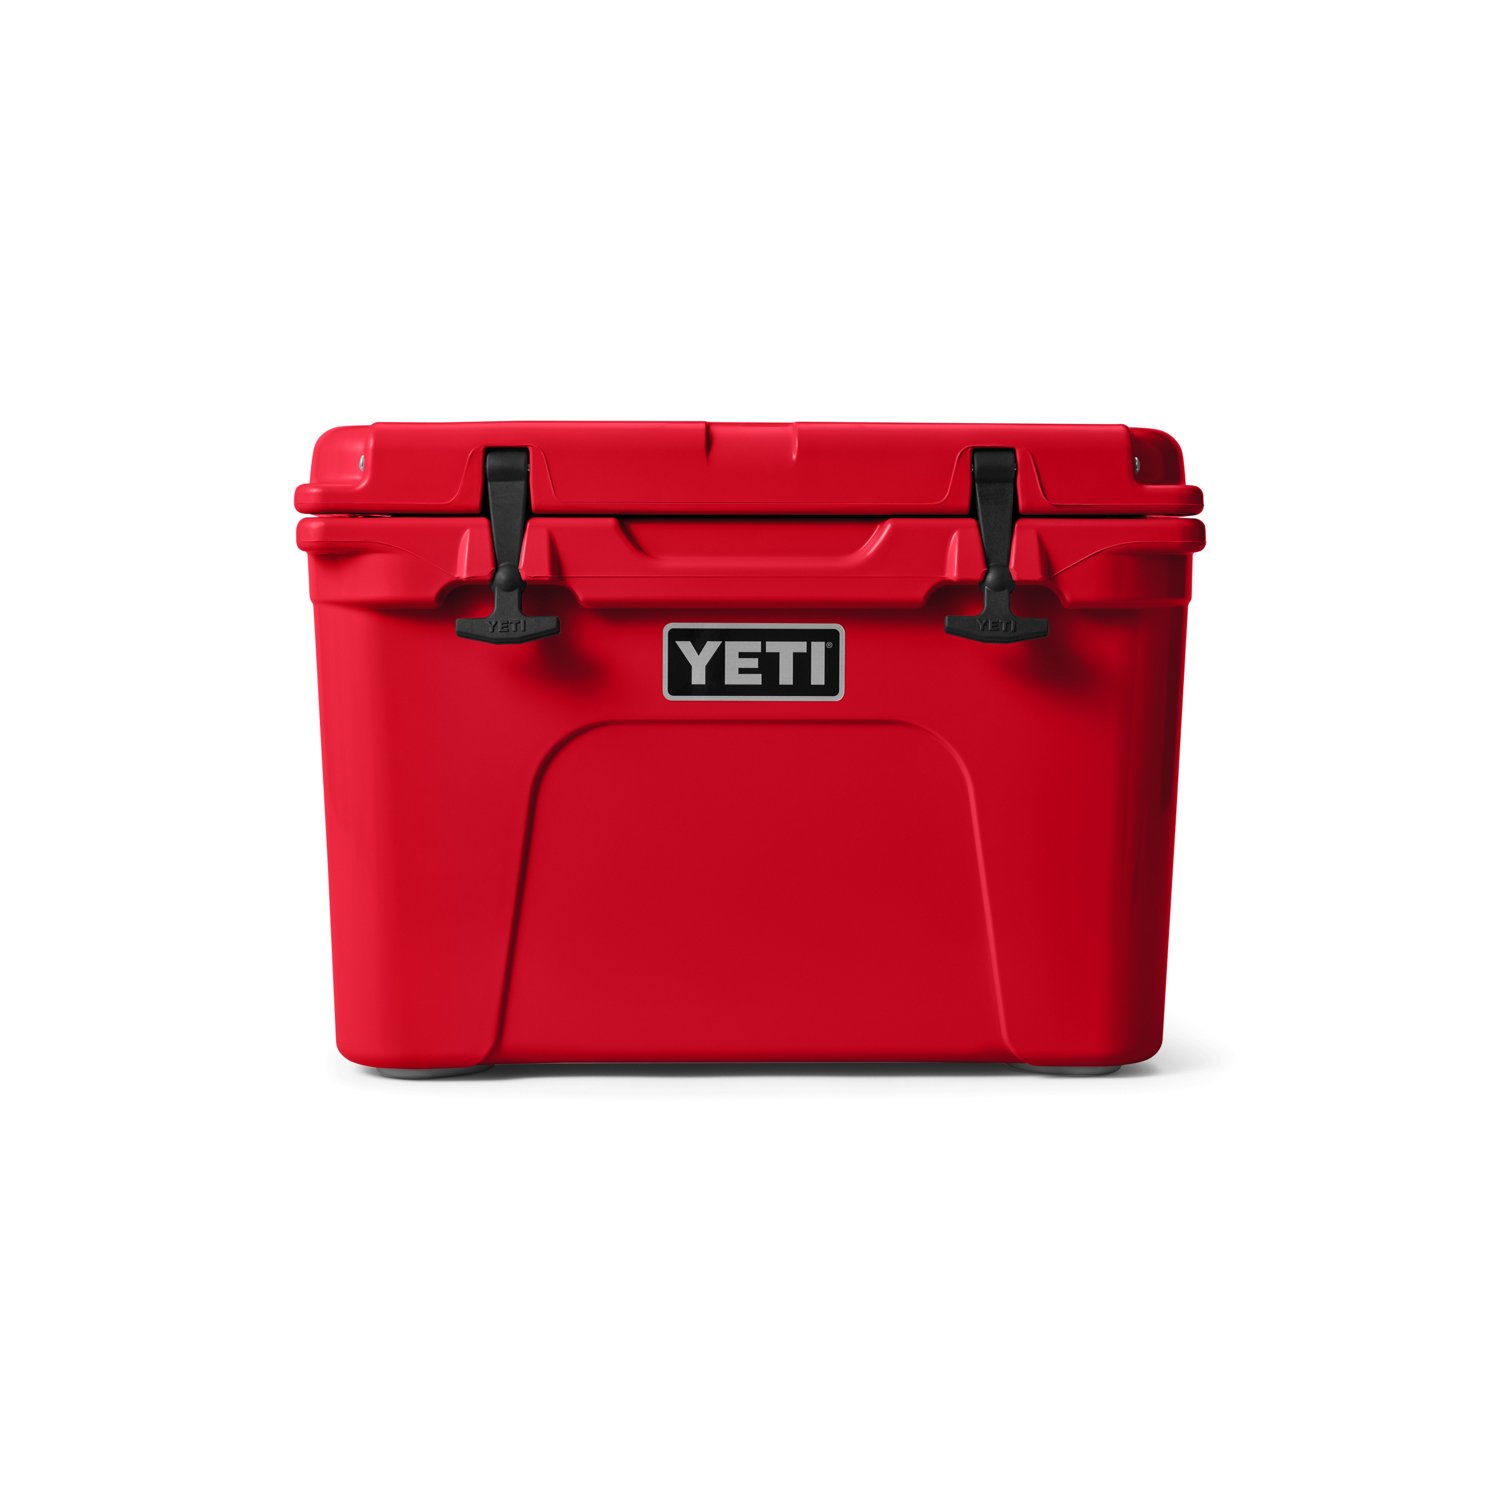 https://academy.scene7.com/is/image/academy//coolers/yeti-tundra-35-cooler-10035350000-red/4211df7f9f4041a4ba438847b58ed2d7